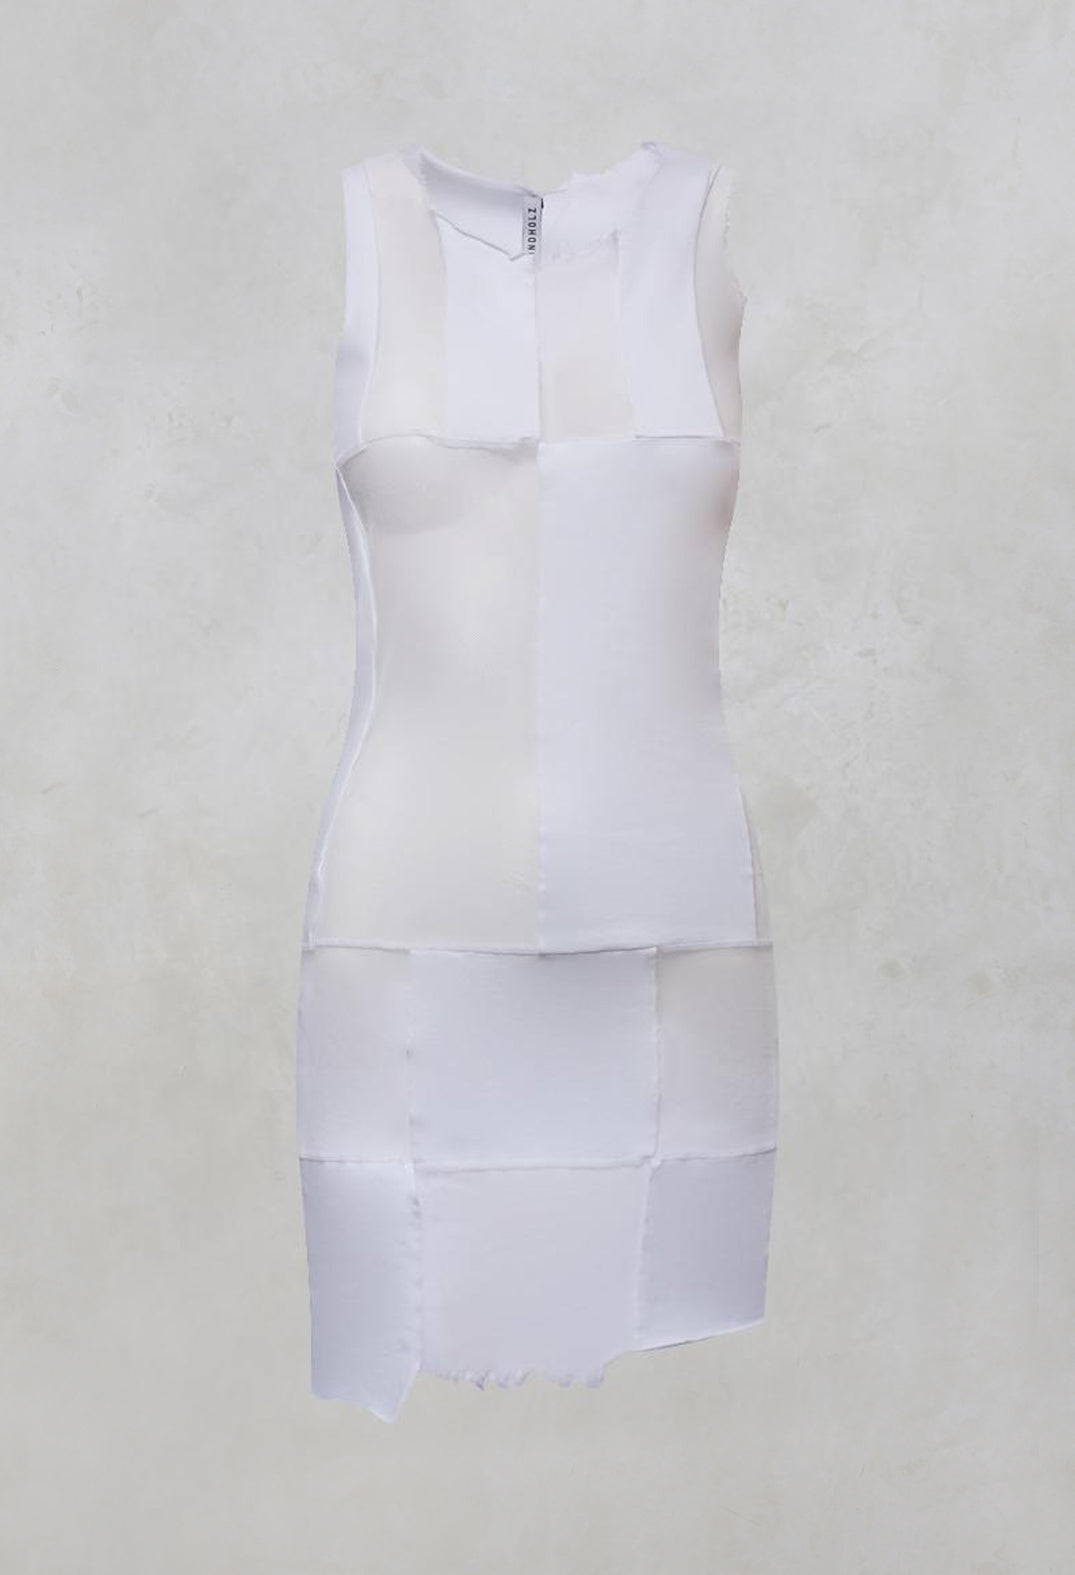 Sheer Sleeveless Tunic Vest with Patchwork Panels in White